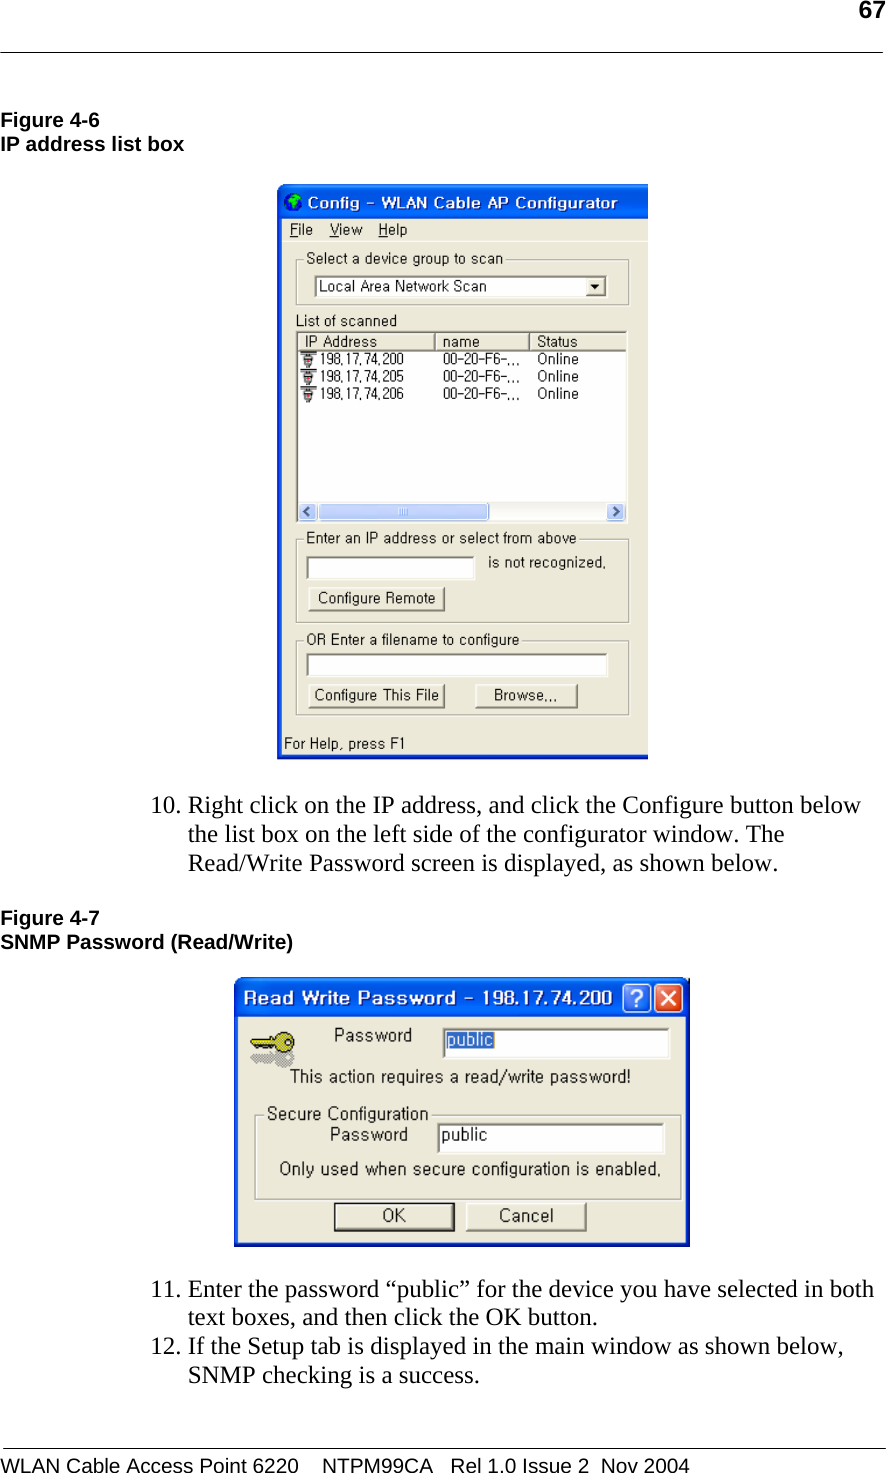   67  WLAN Cable Access Point 6220    NTPM99CA   Rel 1.0 Issue 2  Nov 2004 Figure 4-6 IP address list box      10. Right click on the IP address, and click the Configure button below the list box on the left side of the configurator window. The Read/Write Password screen is displayed, as shown below.  Figure 4-7 SNMP Password (Read/Write)    11. Enter the password “public” for the device you have selected in both text boxes, and then click the OK button.  12. If the Setup tab is displayed in the main window as shown below, SNMP checking is a success. 